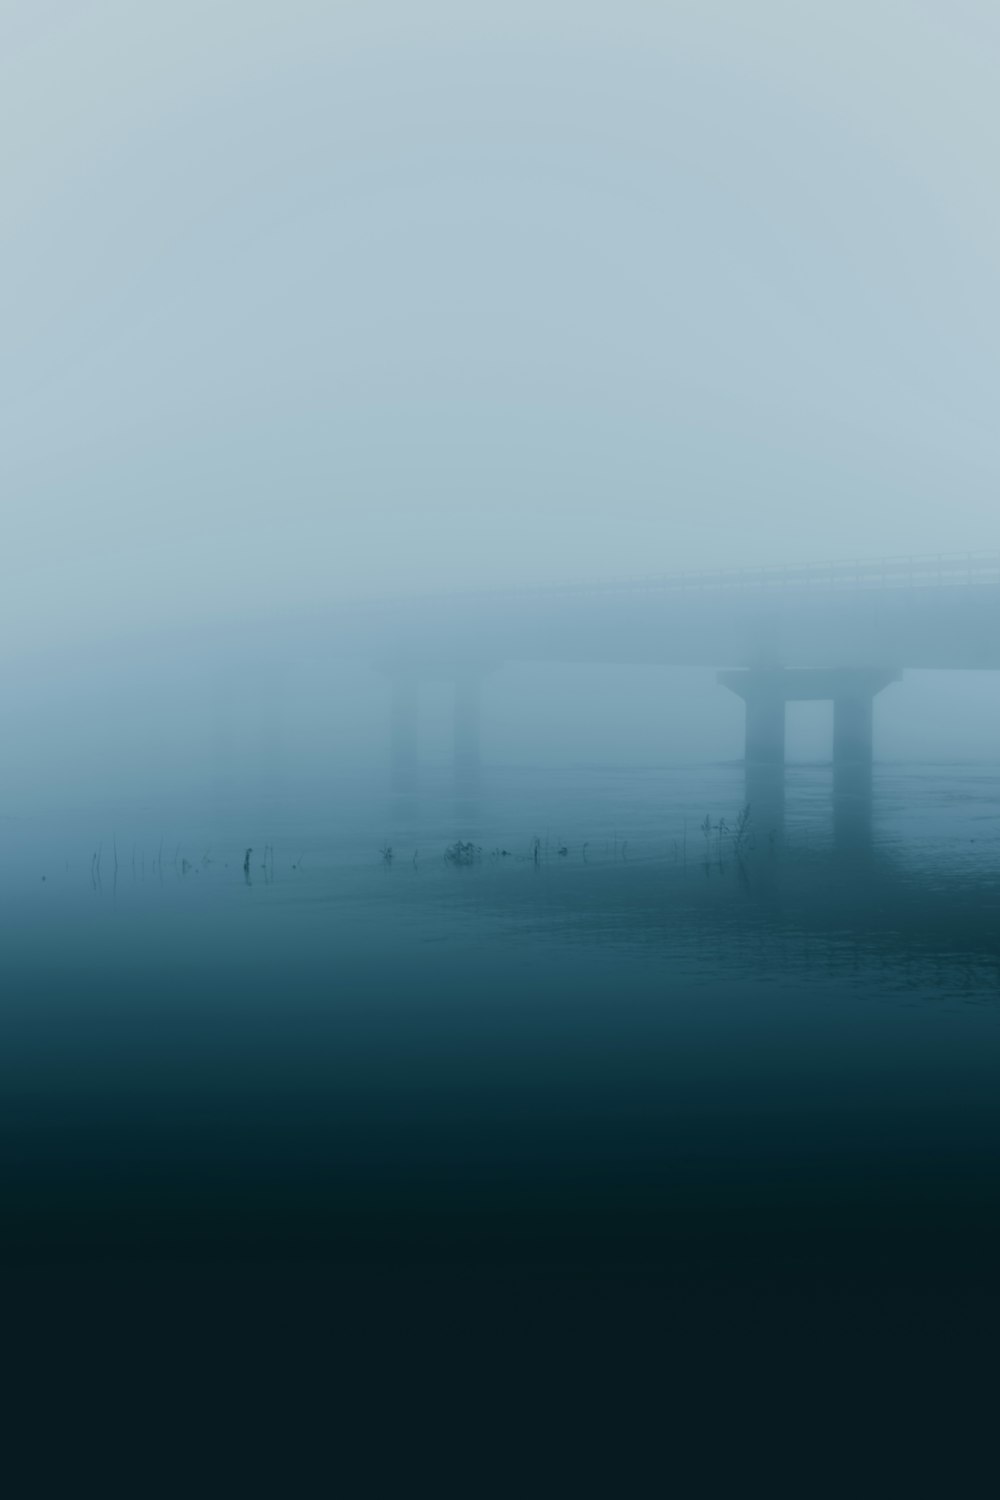 a bridge in a foggy sky over a body of water